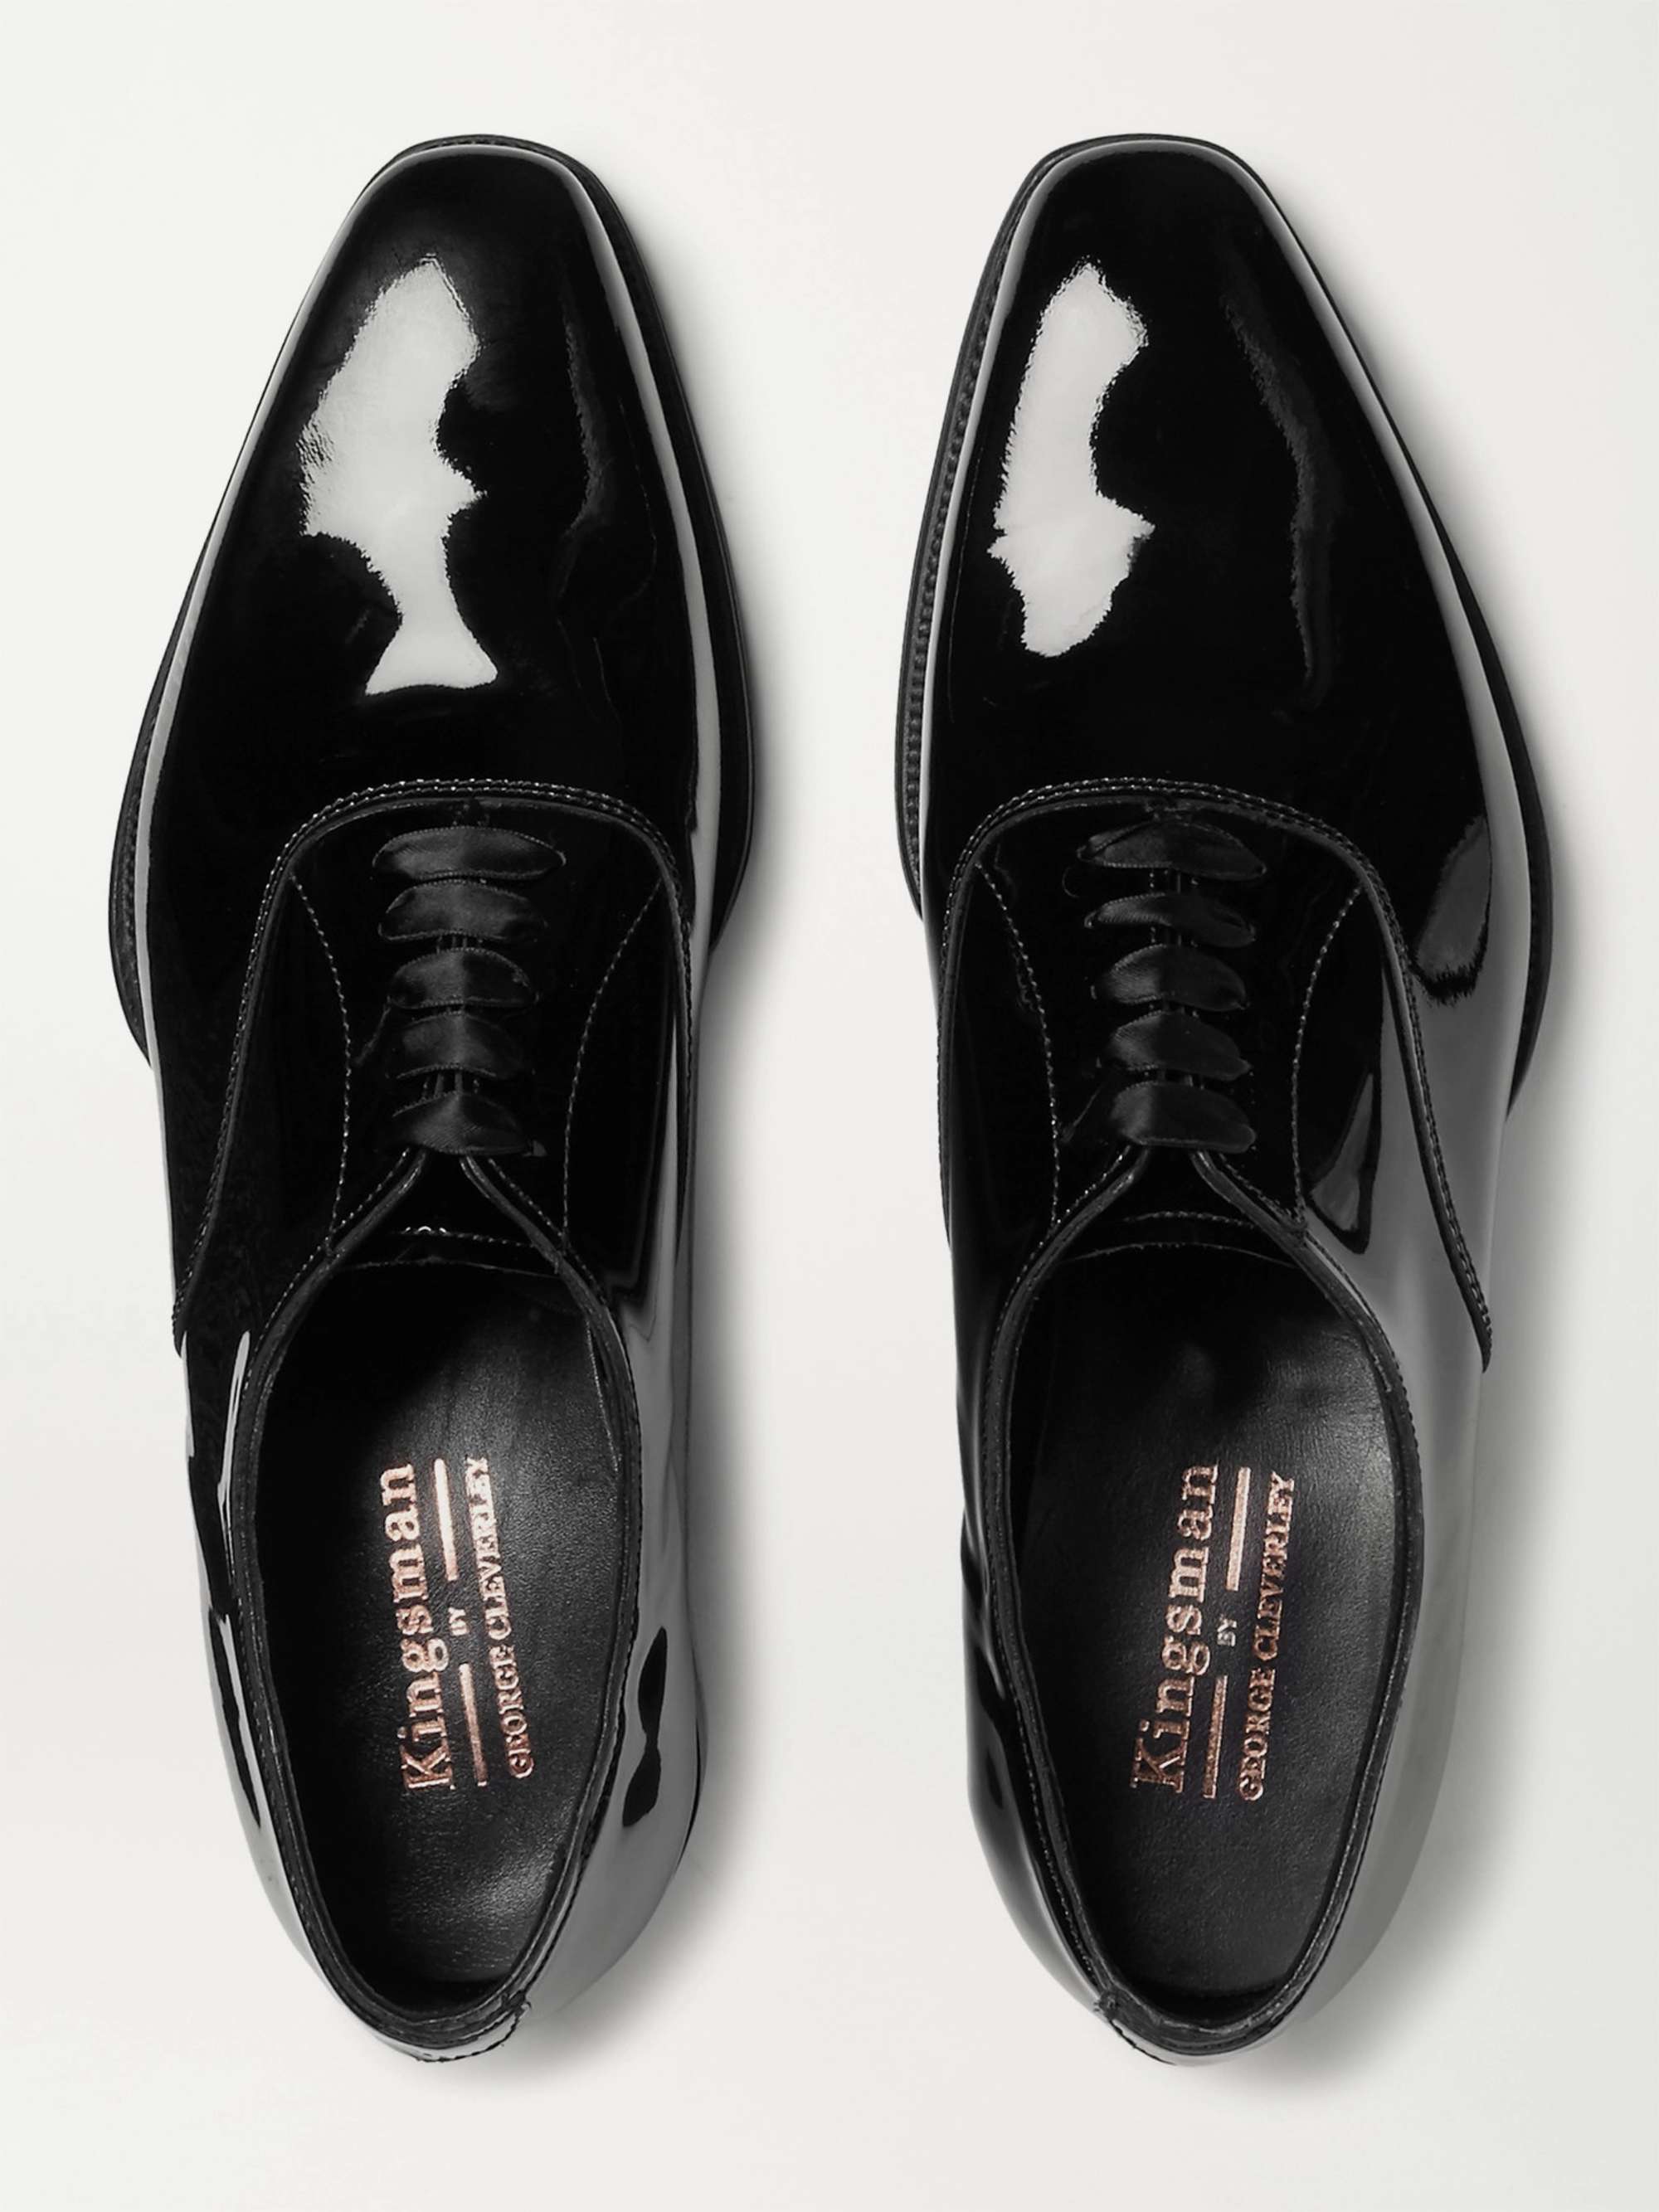 KINGSMAN + George Cleverley Patent-Leather Oxford Shoes